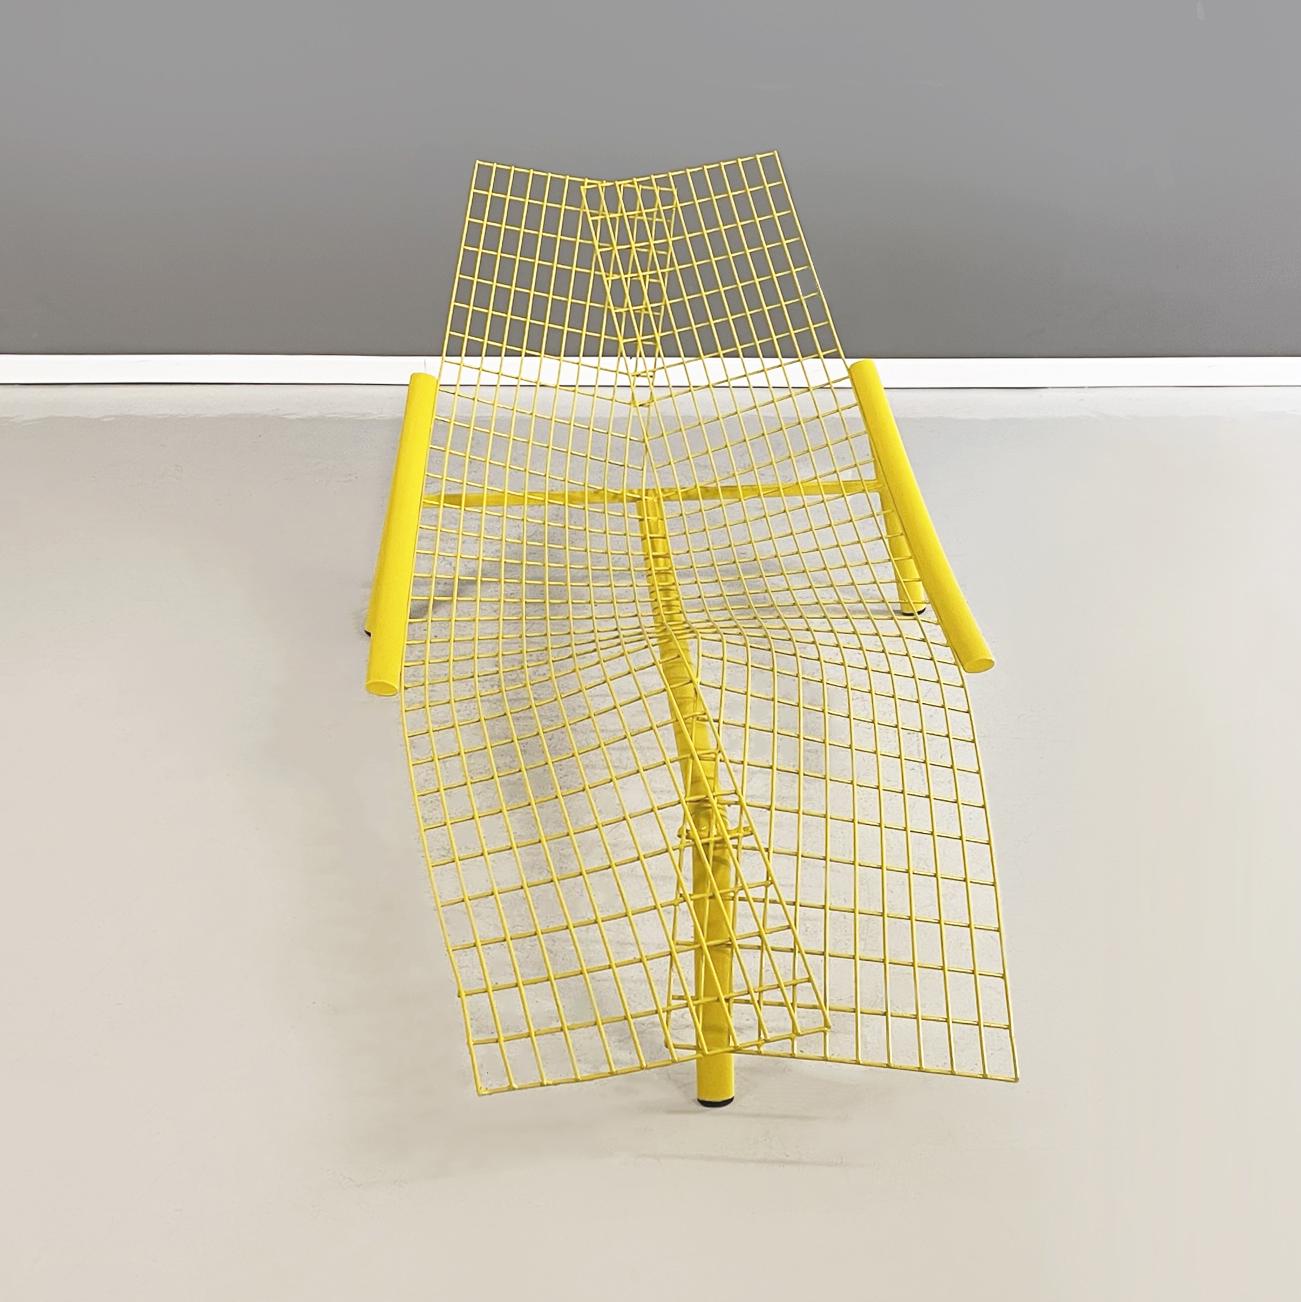 Italian modern Yellow metal Deck chair Swing Rete by Offredi for Saporiti, 1980s
Deck chair mod. Swing Rete entirely in yellow painted metal. The structure of the seat is made of sheet metal. The 3 legs have an oval section in metal. This elegant